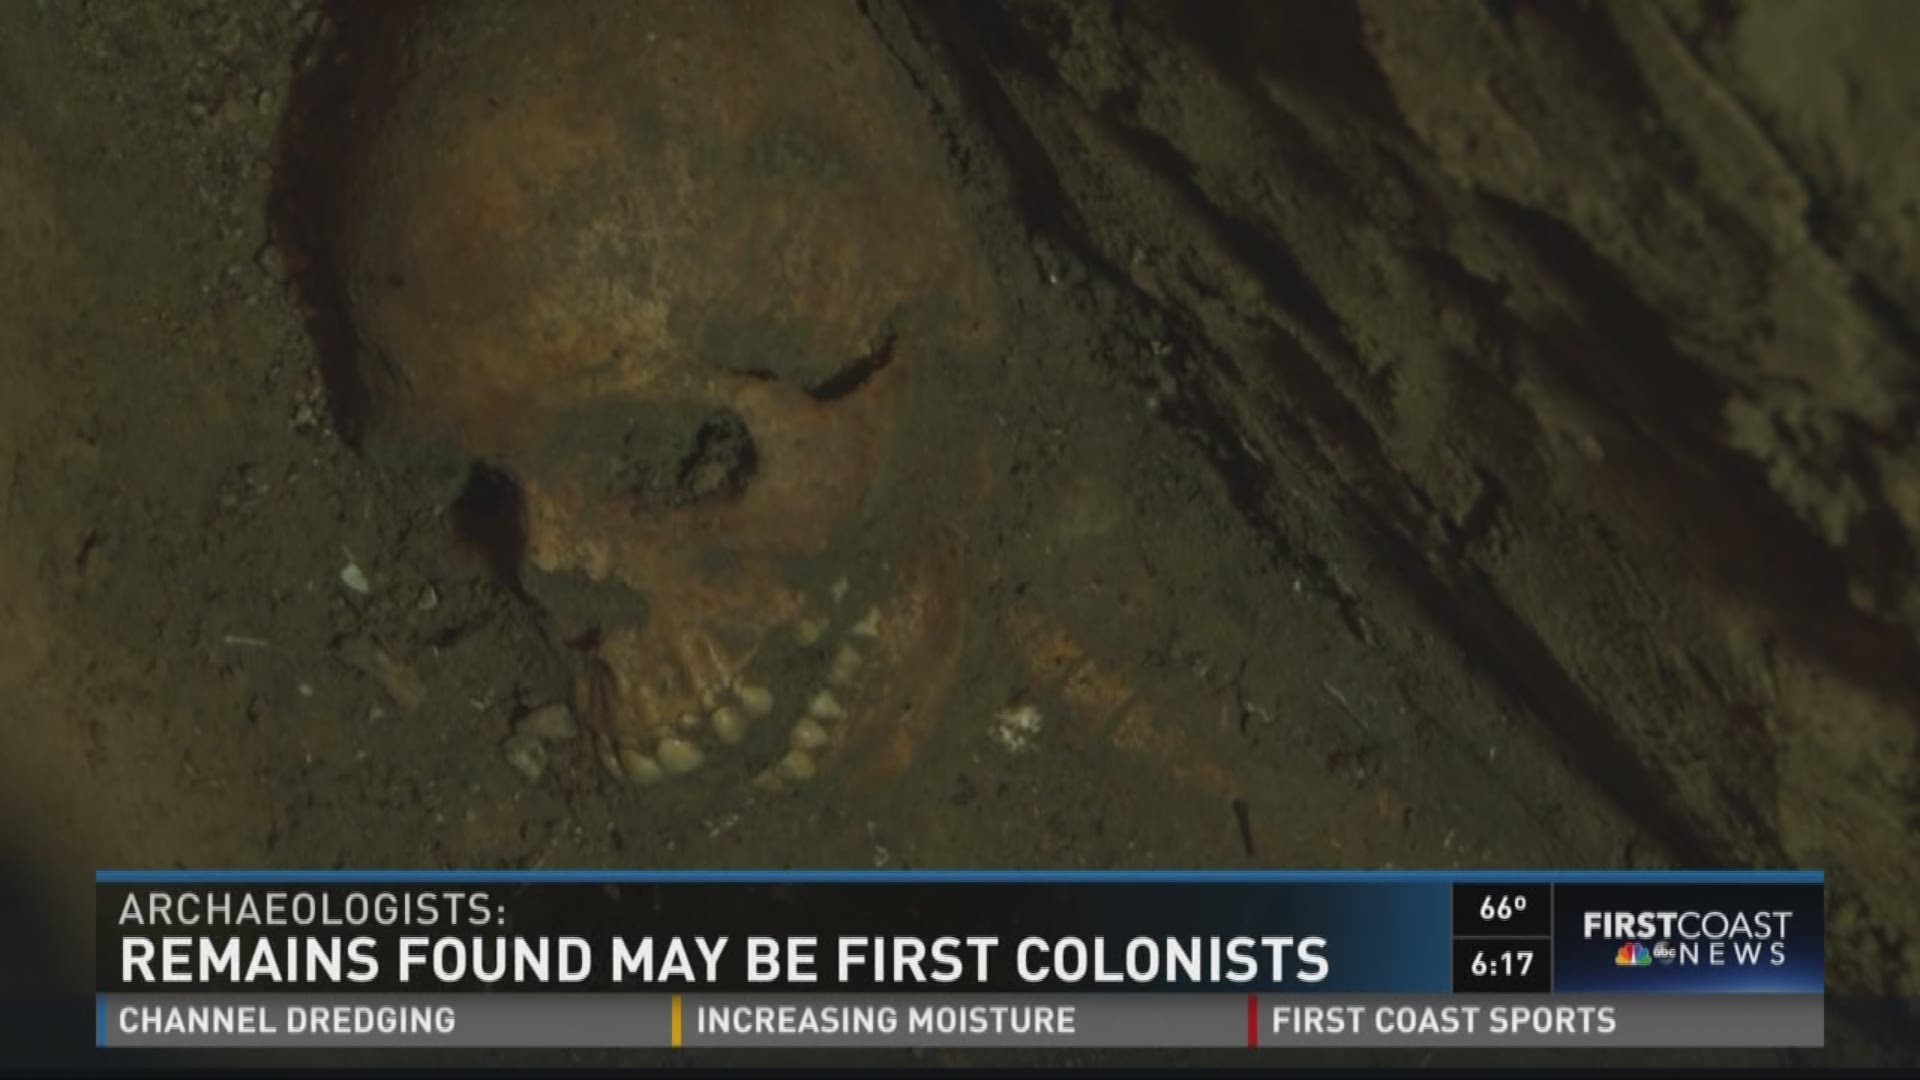 Human remains from 1500s unearthed in St. Augustine